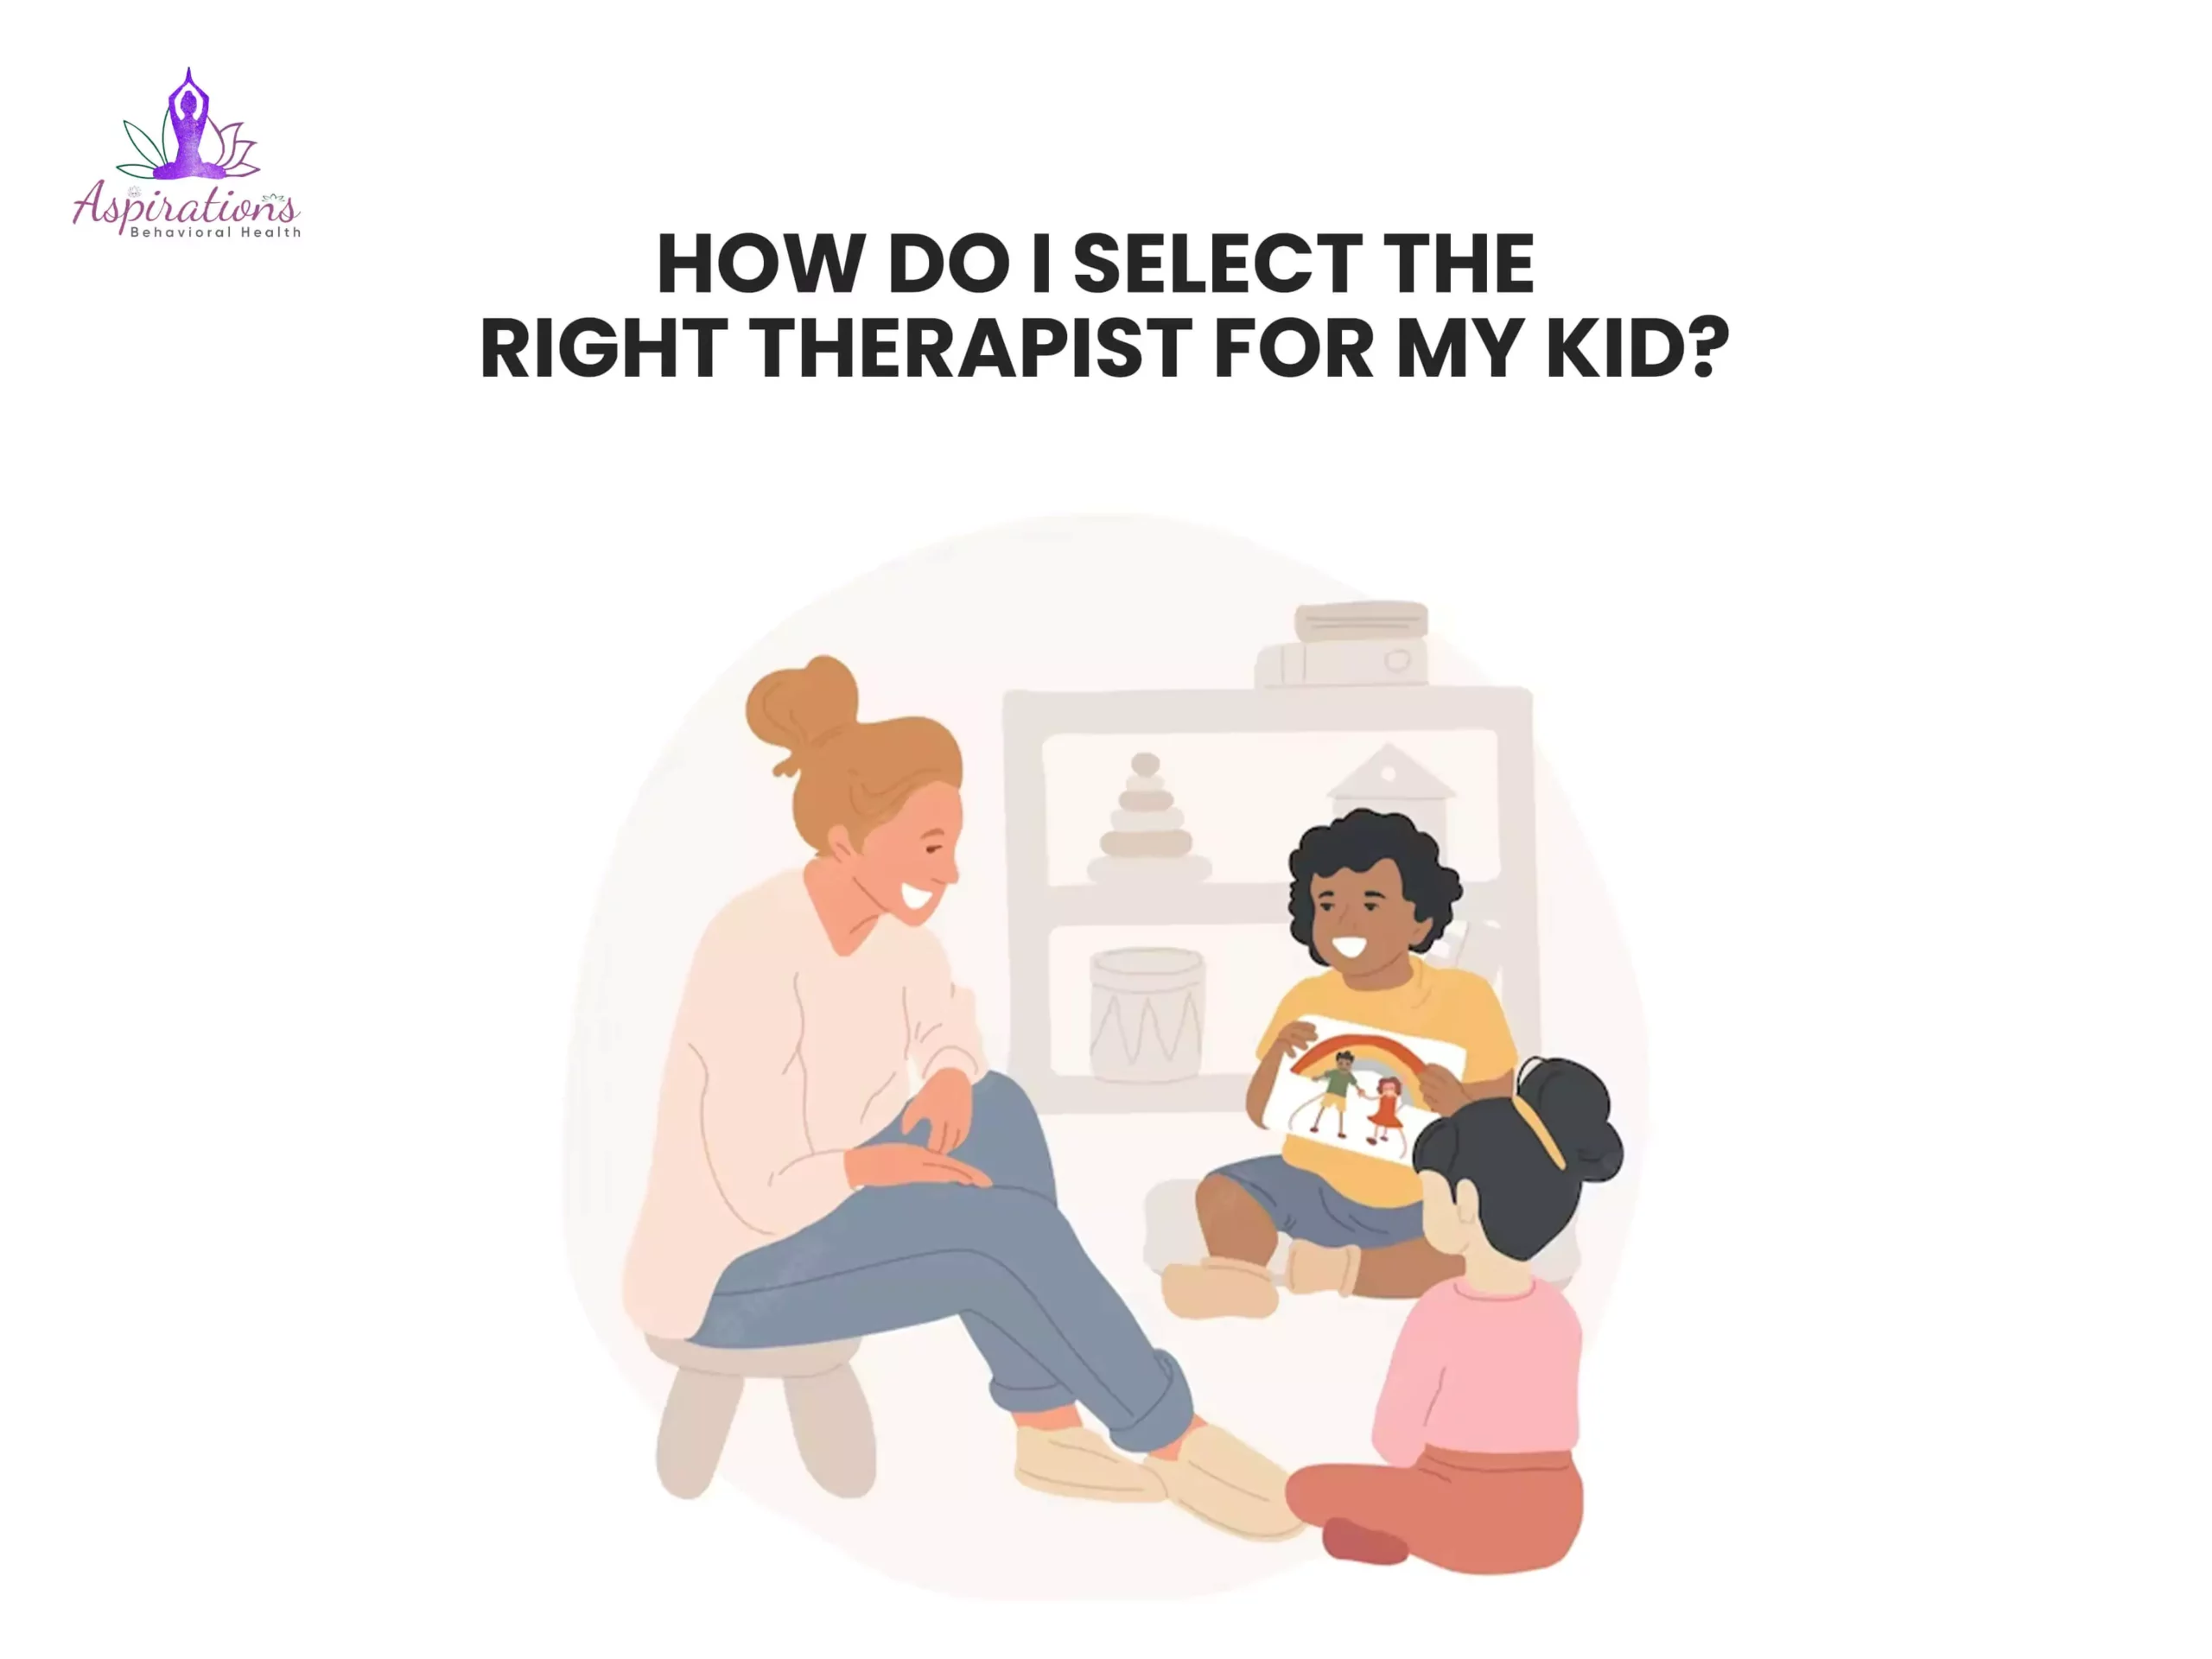 How Do I Select the Right Therapist for My Kid?